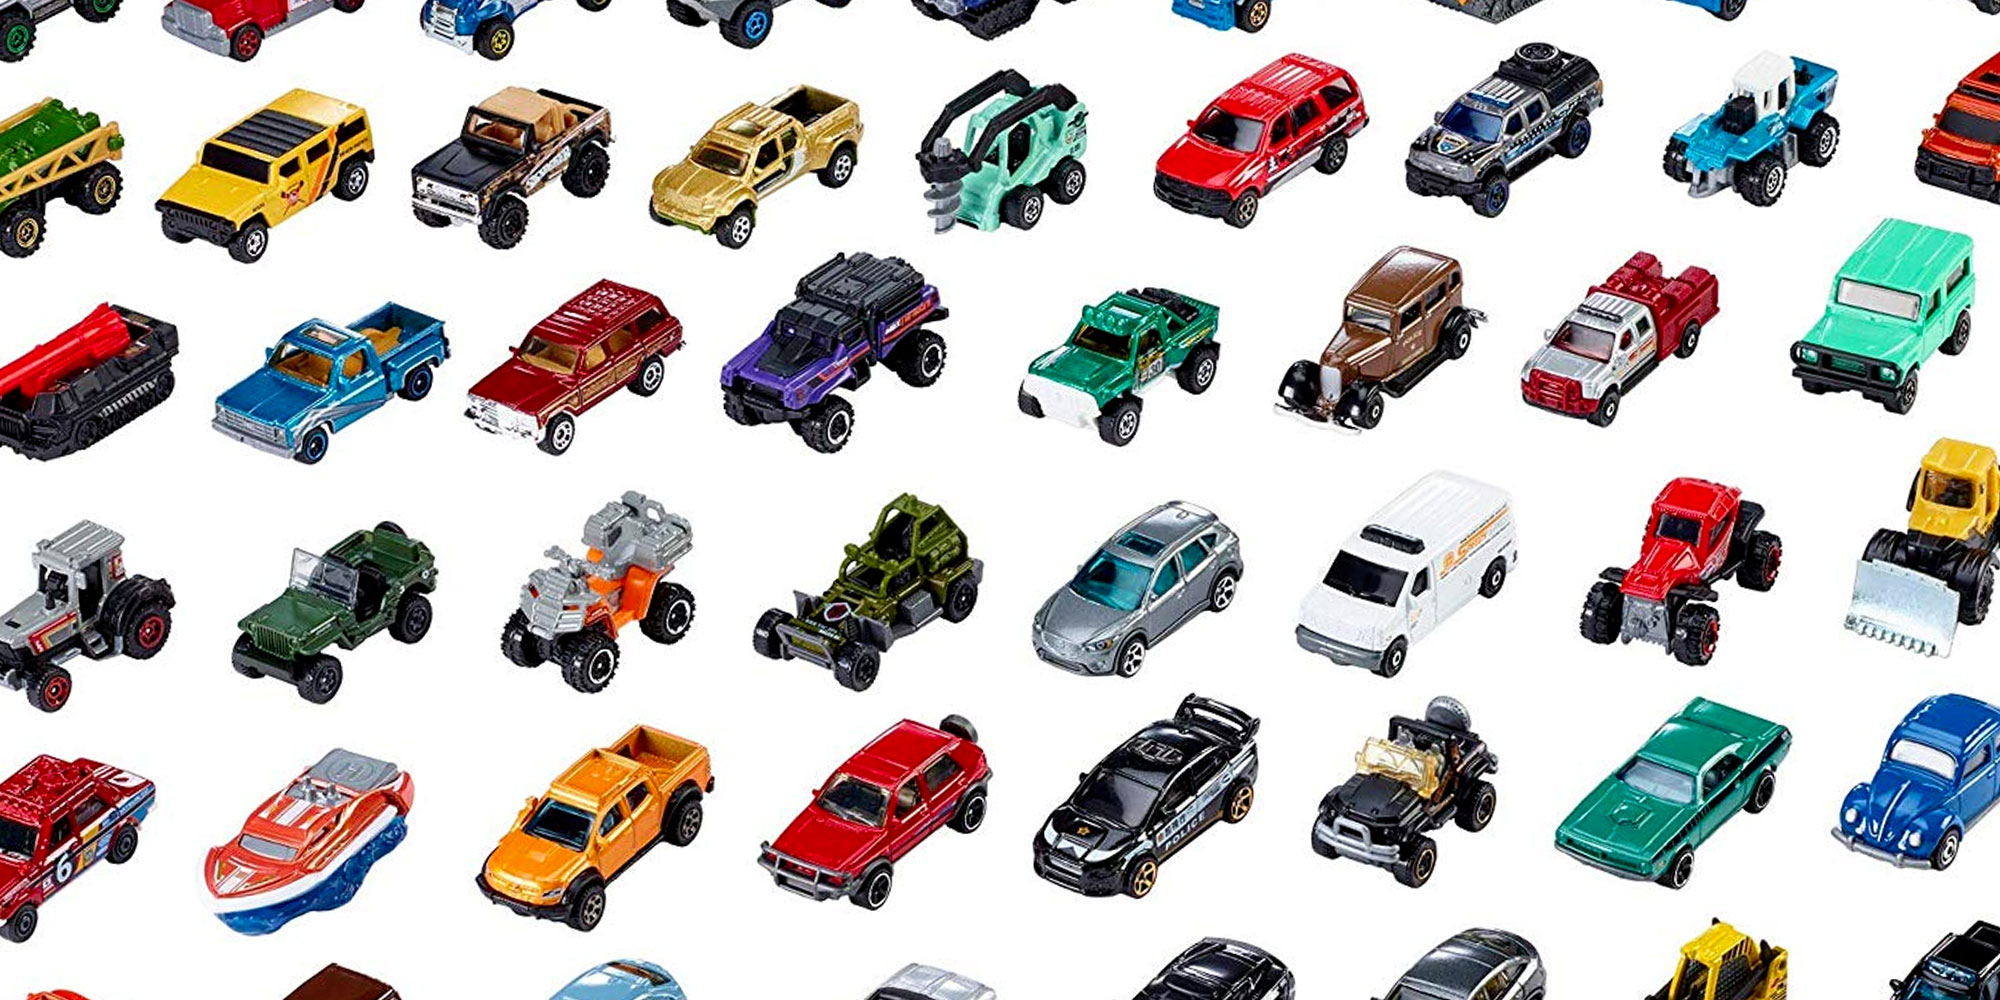 Expand your vehicle collection with 50 Matchbox cars for 0.60 a piece